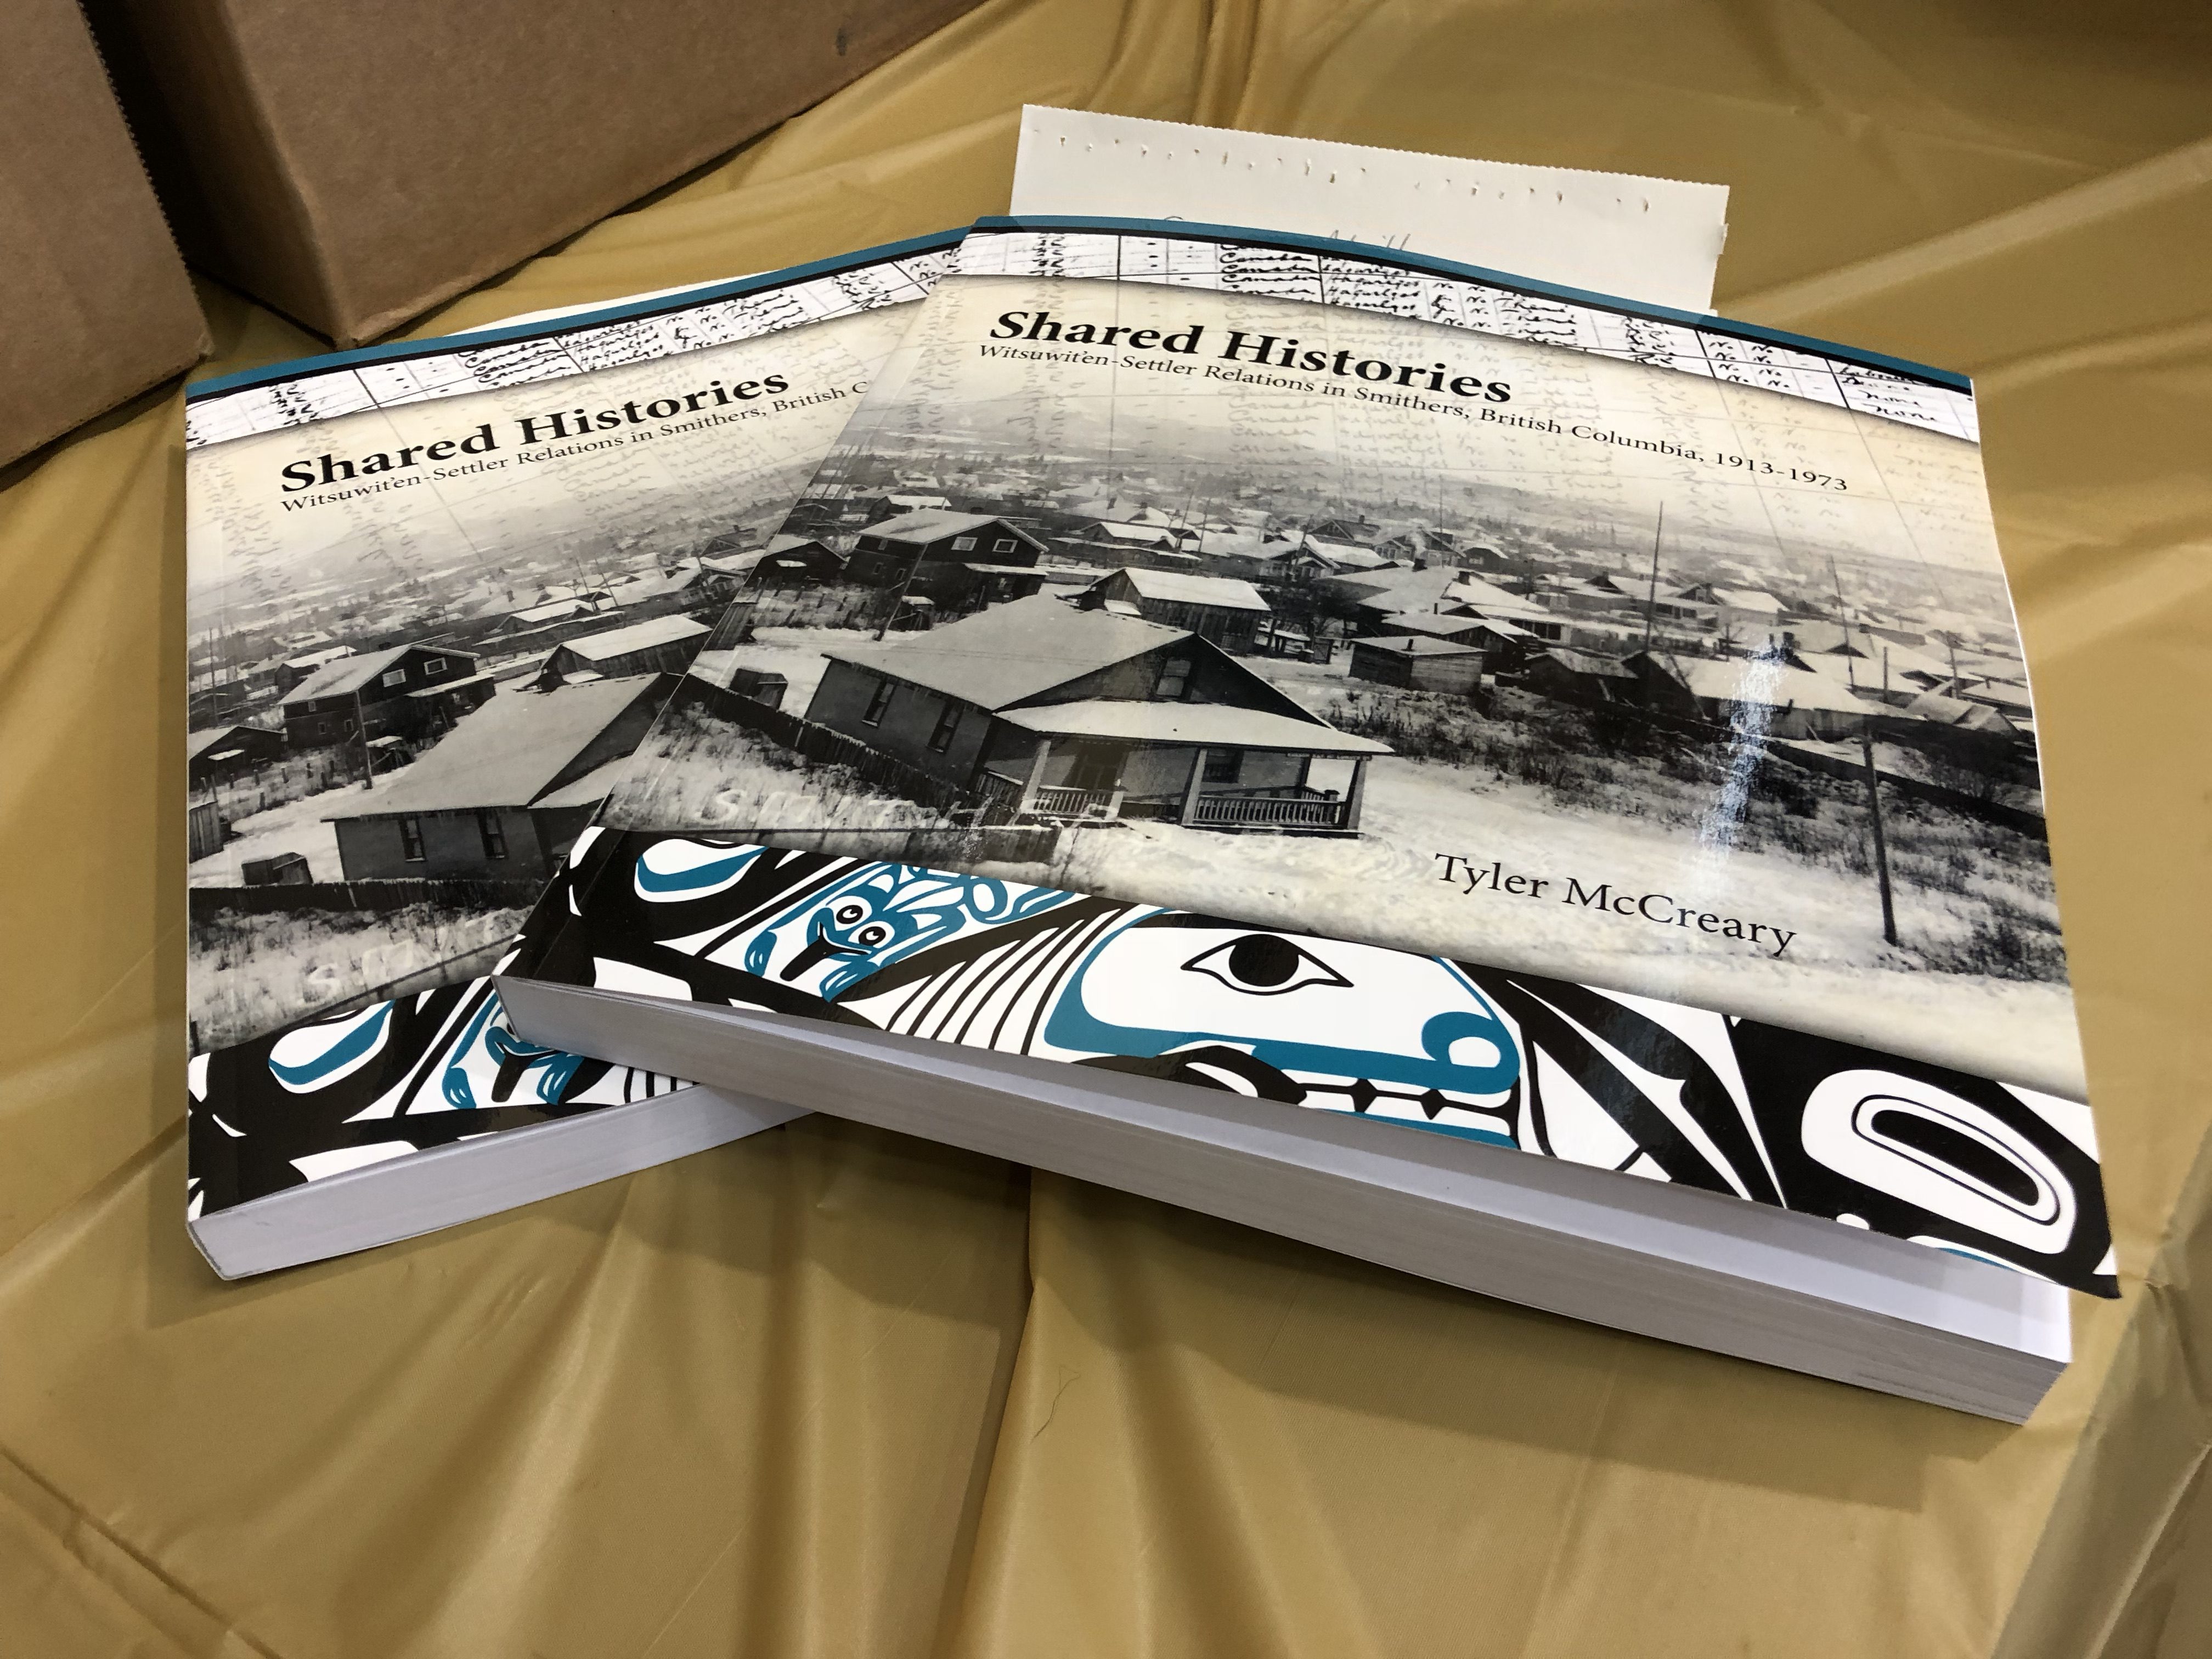 Book Review – Shared Histories – Witsuwit’en – Settler Relations in Smithers 1913 – 1973